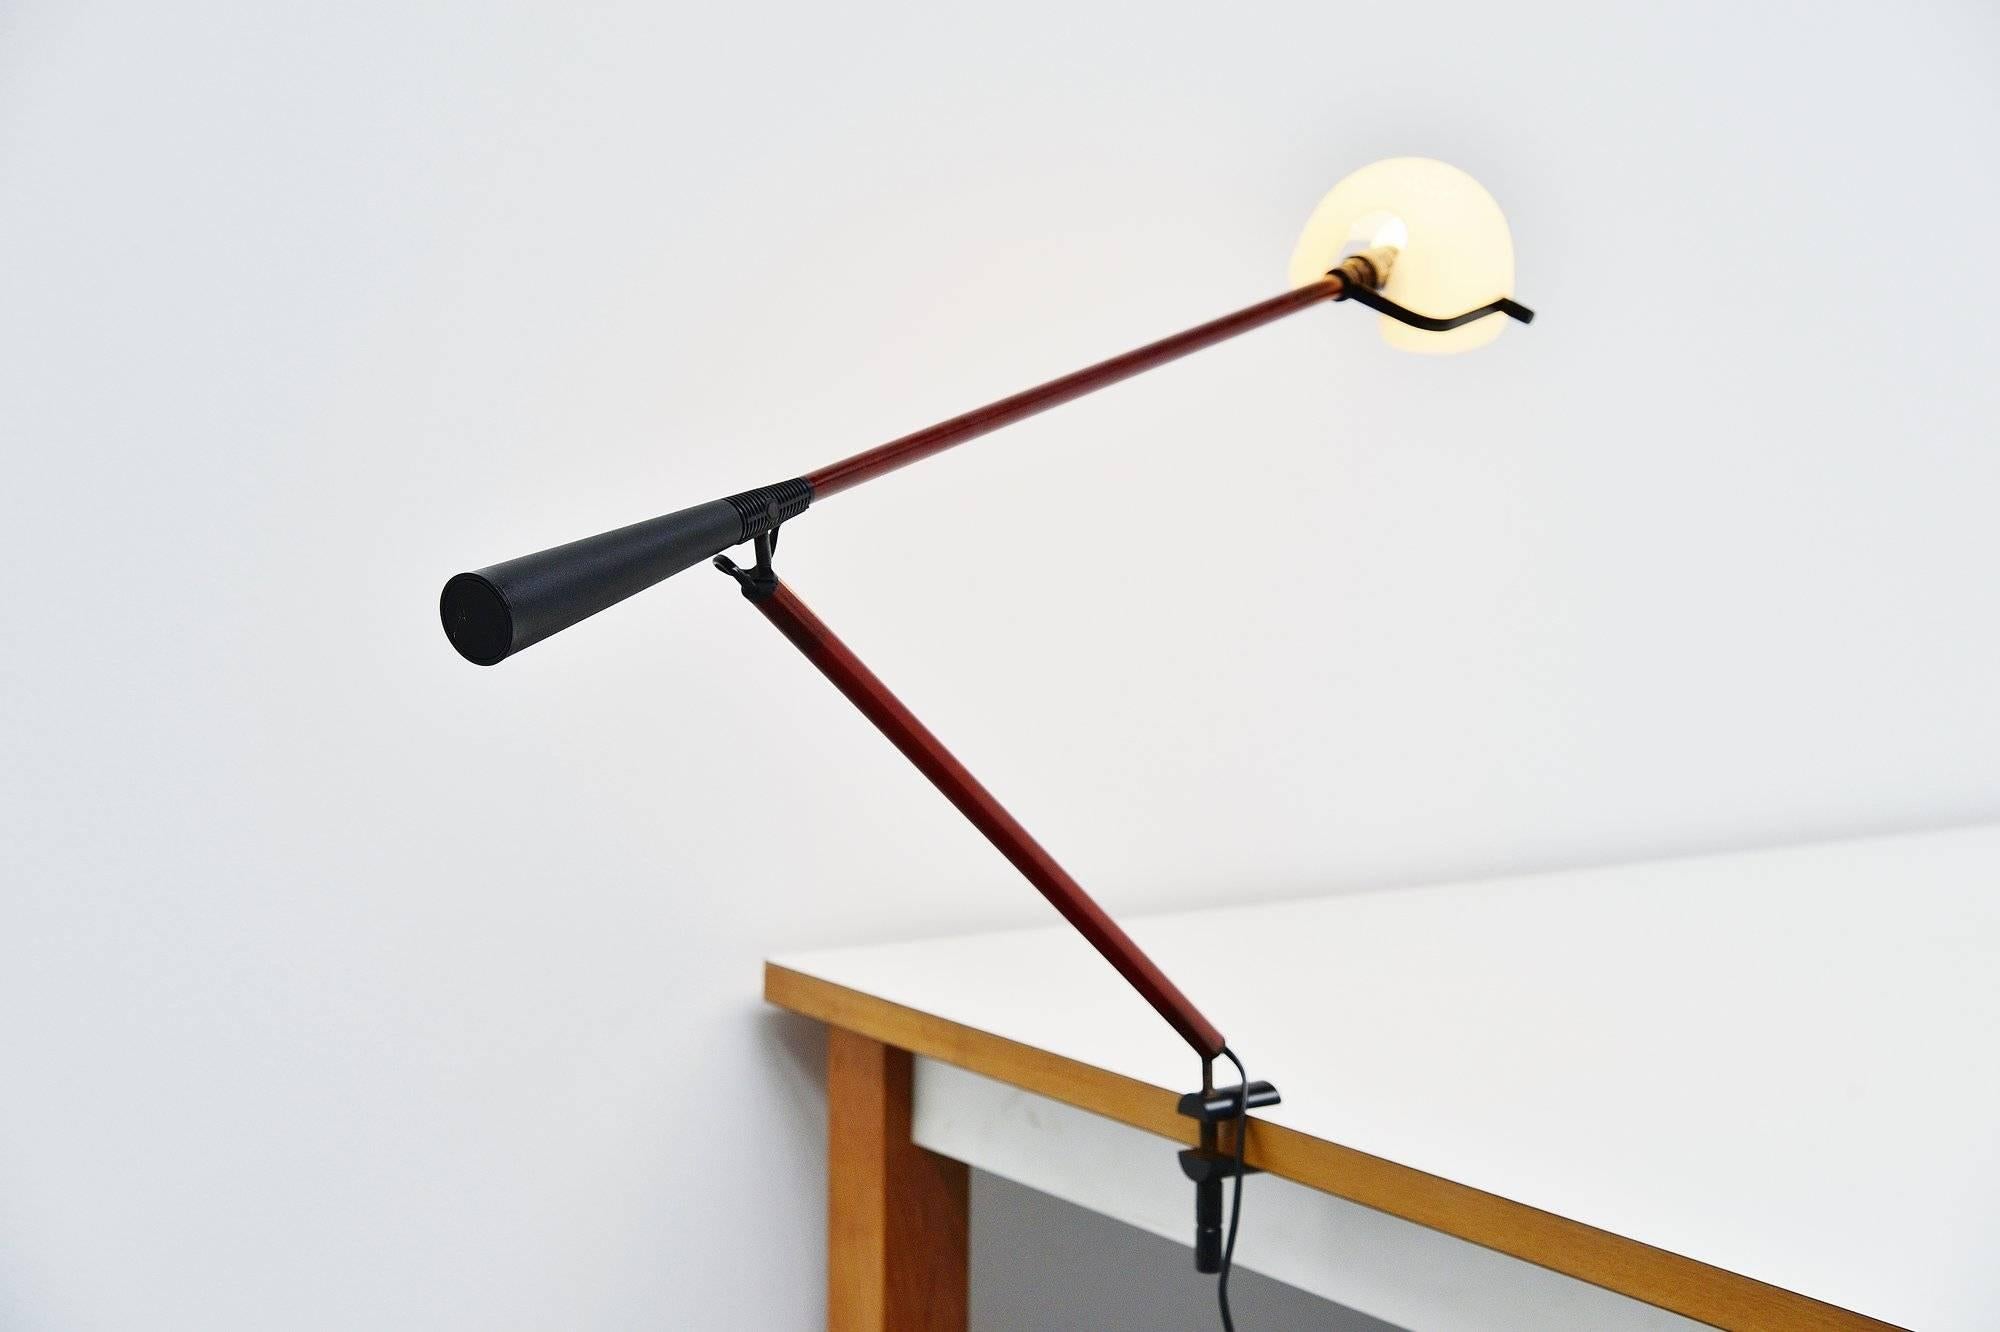 Very nice and multifunctional desk or table lamp by Paolo Rizzatto for Arteluce. This is model number 612 manufactured by Arteluce in 1975. This lamp has a clamp to attach to a table or desk and contra weight at the end of the arm, fully adjustable